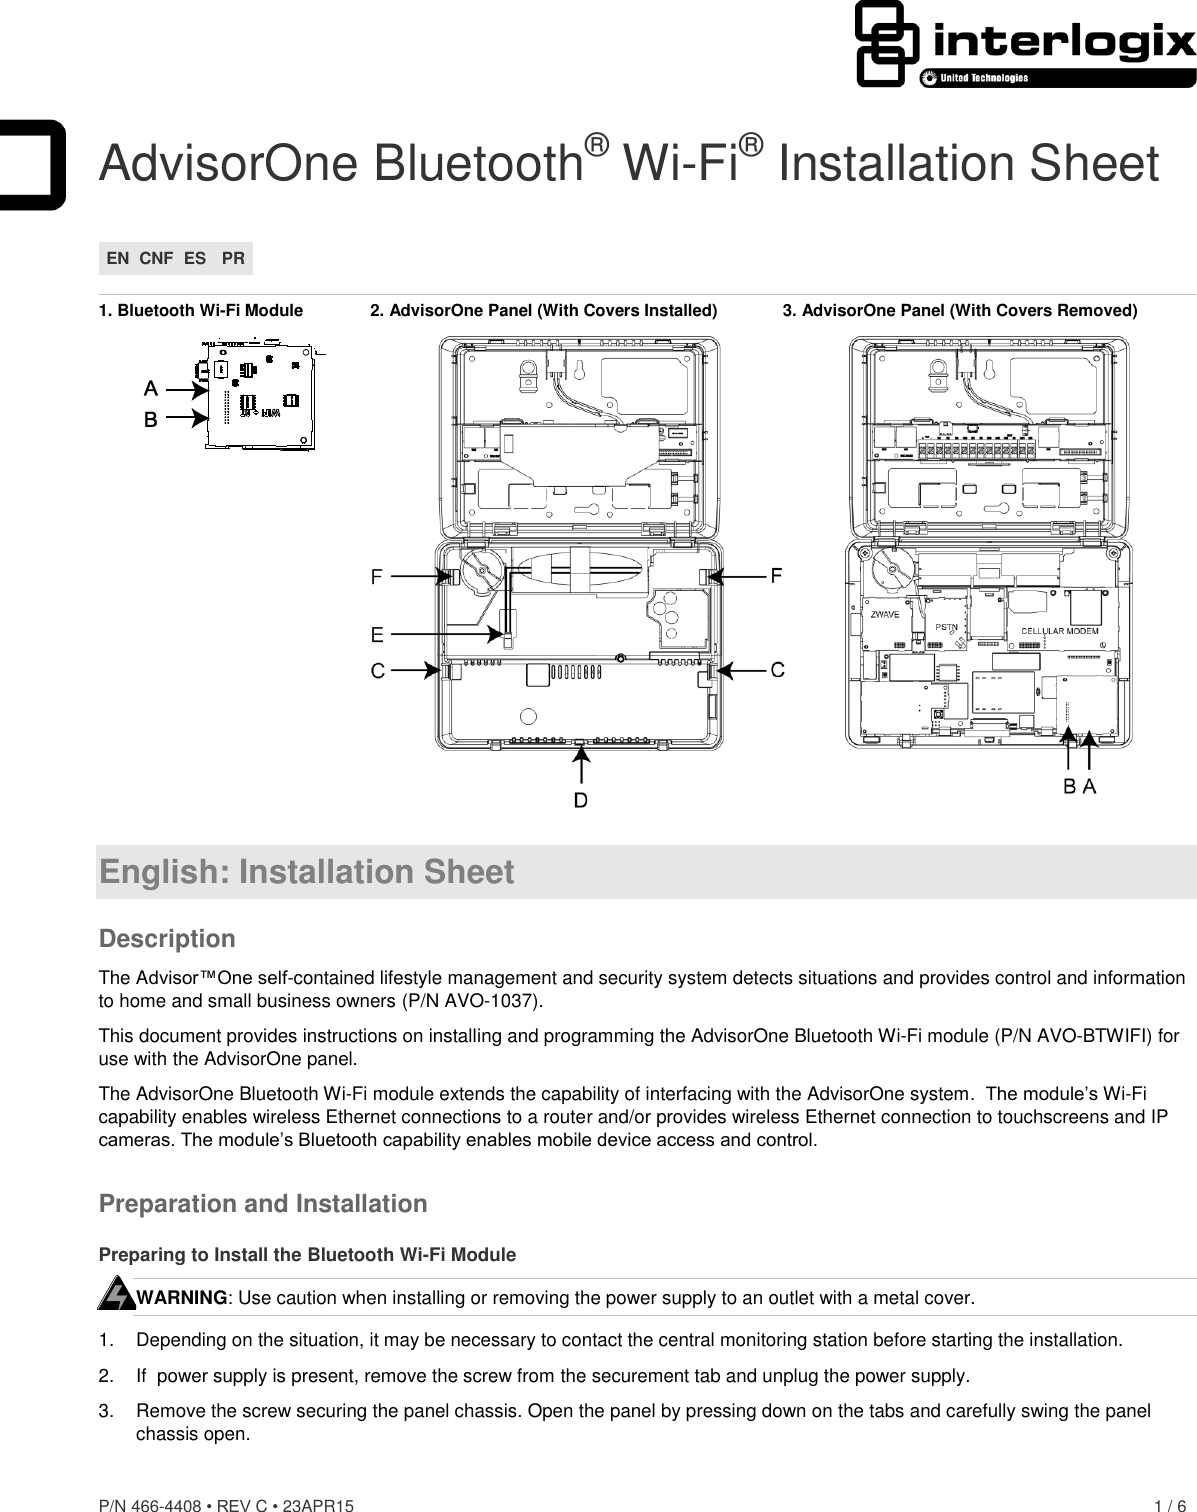 P/N 466-4408 • REV C • 23APR15    1 / 6  AdvisorOne Bluetooth® Wi-Fi® Installation Sheet EN CNF ES PR  1. Bluetooth Wi-Fi Module  2. AdvisorOne Panel (With Covers Installed)  3. AdvisorOne Panel (With Covers Removed)   English: Installation Sheet Description The Advisor™One self-contained lifestyle management and security system detects situations and provides control and information to home and small business owners (P/N AVO-1037). This document provides instructions on installing and programming the AdvisorOne Bluetooth Wi-Fi module (P/N AVO-BTWIFI) for use with the AdvisorOne panel. The AdvisorOne Bluetooth Wi-Fi module extends the capability of interfacing with the AdvisorOne system.  The module’s Wi-Fi capability enables wireless Ethernet connections to a router and/or provides wireless Ethernet connection to touchscreens and IP cameras. The module’s Bluetooth capability enables mobile device access and control. Preparation and Installation Preparing to Install the Bluetooth Wi-Fi Module WARNING: Use caution when installing or removing the power supply to an outlet with a metal cover. 1.  Depending on the situation, it may be necessary to contact the central monitoring station before starting the installation. 2. If  power supply is present, remove the screw from the securement tab and unplug the power supply. 3.  Remove the screw securing the panel chassis. Open the panel by pressing down on the tabs and carefully swing the panel chassis open.  